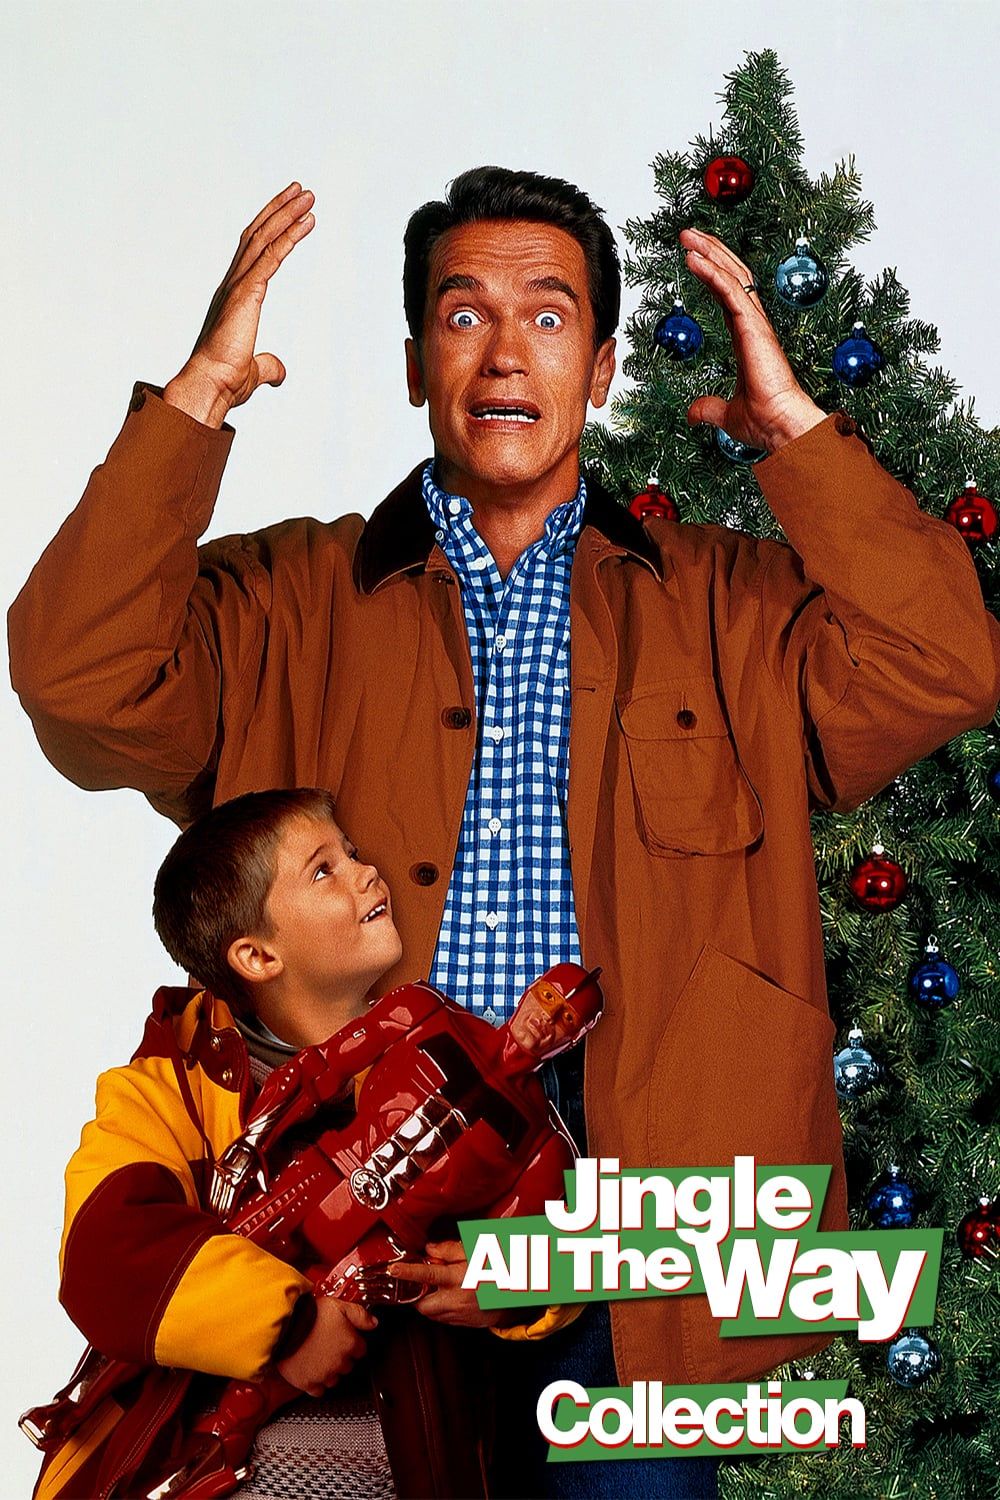 Jingle All the Way Collection